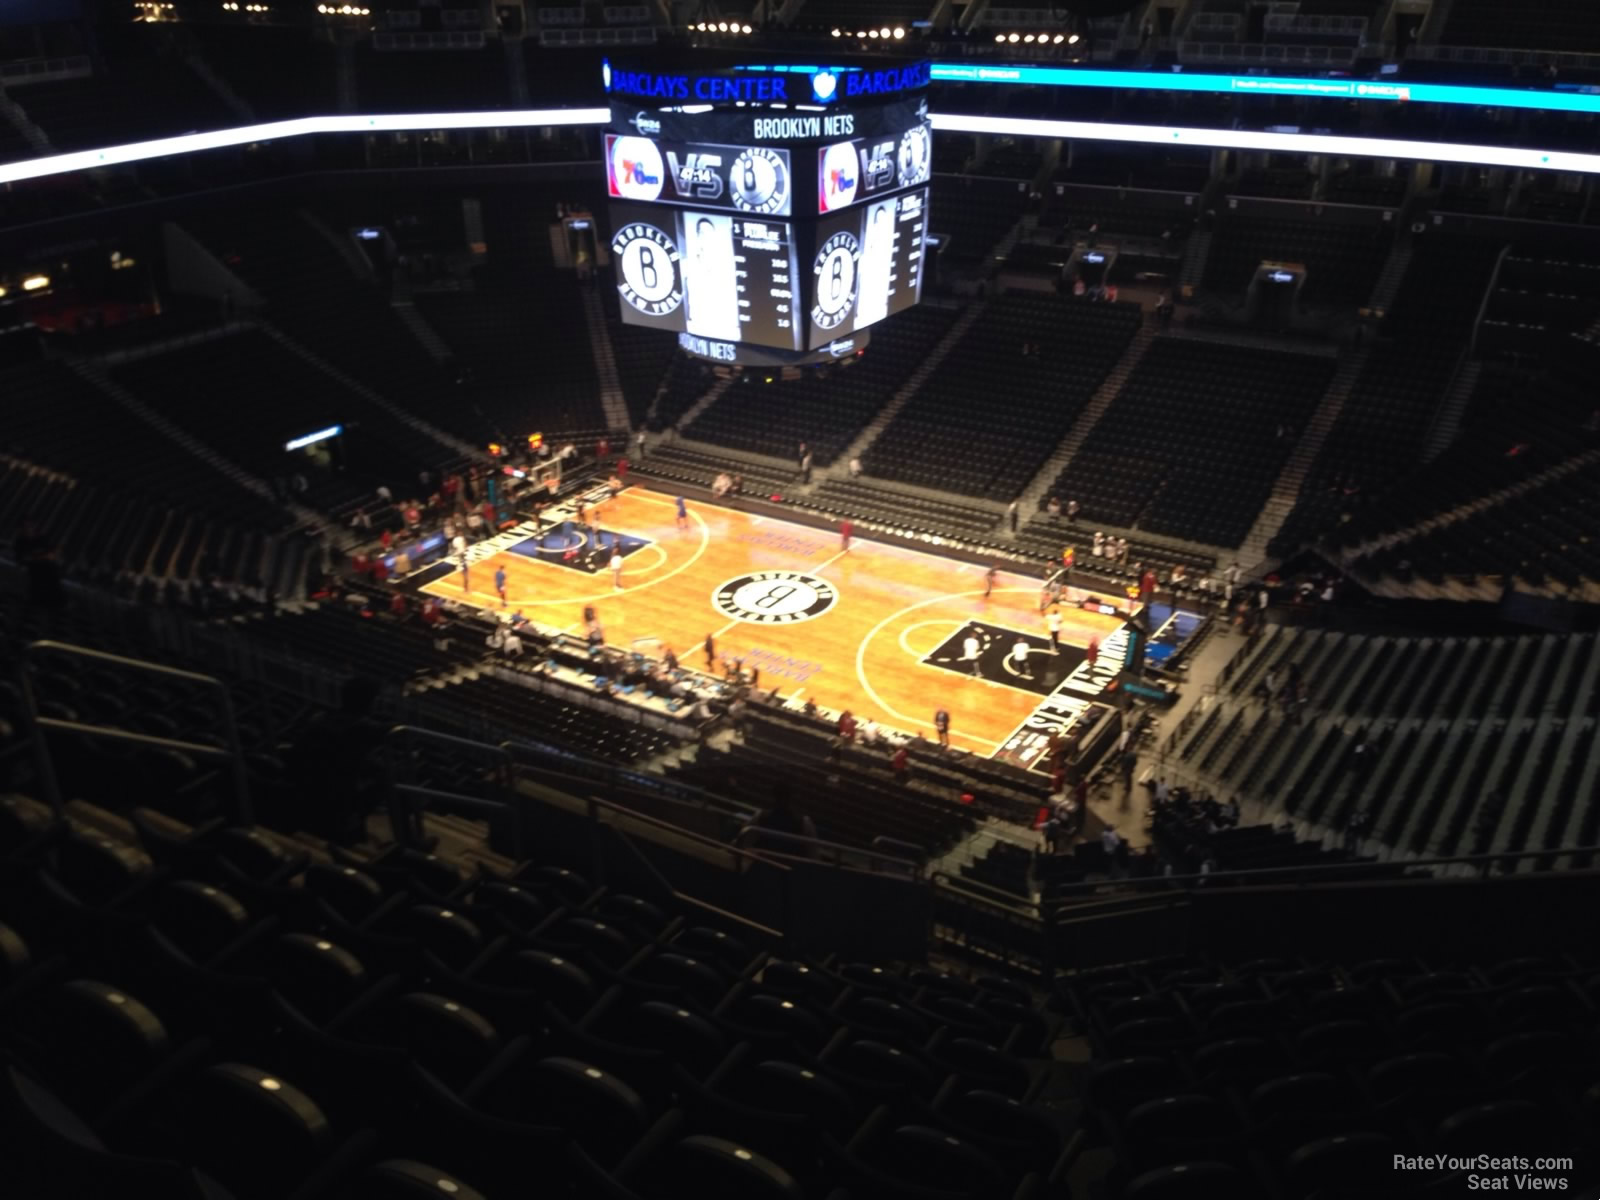 section 205, row 14 seat view  for basketball - barclays center